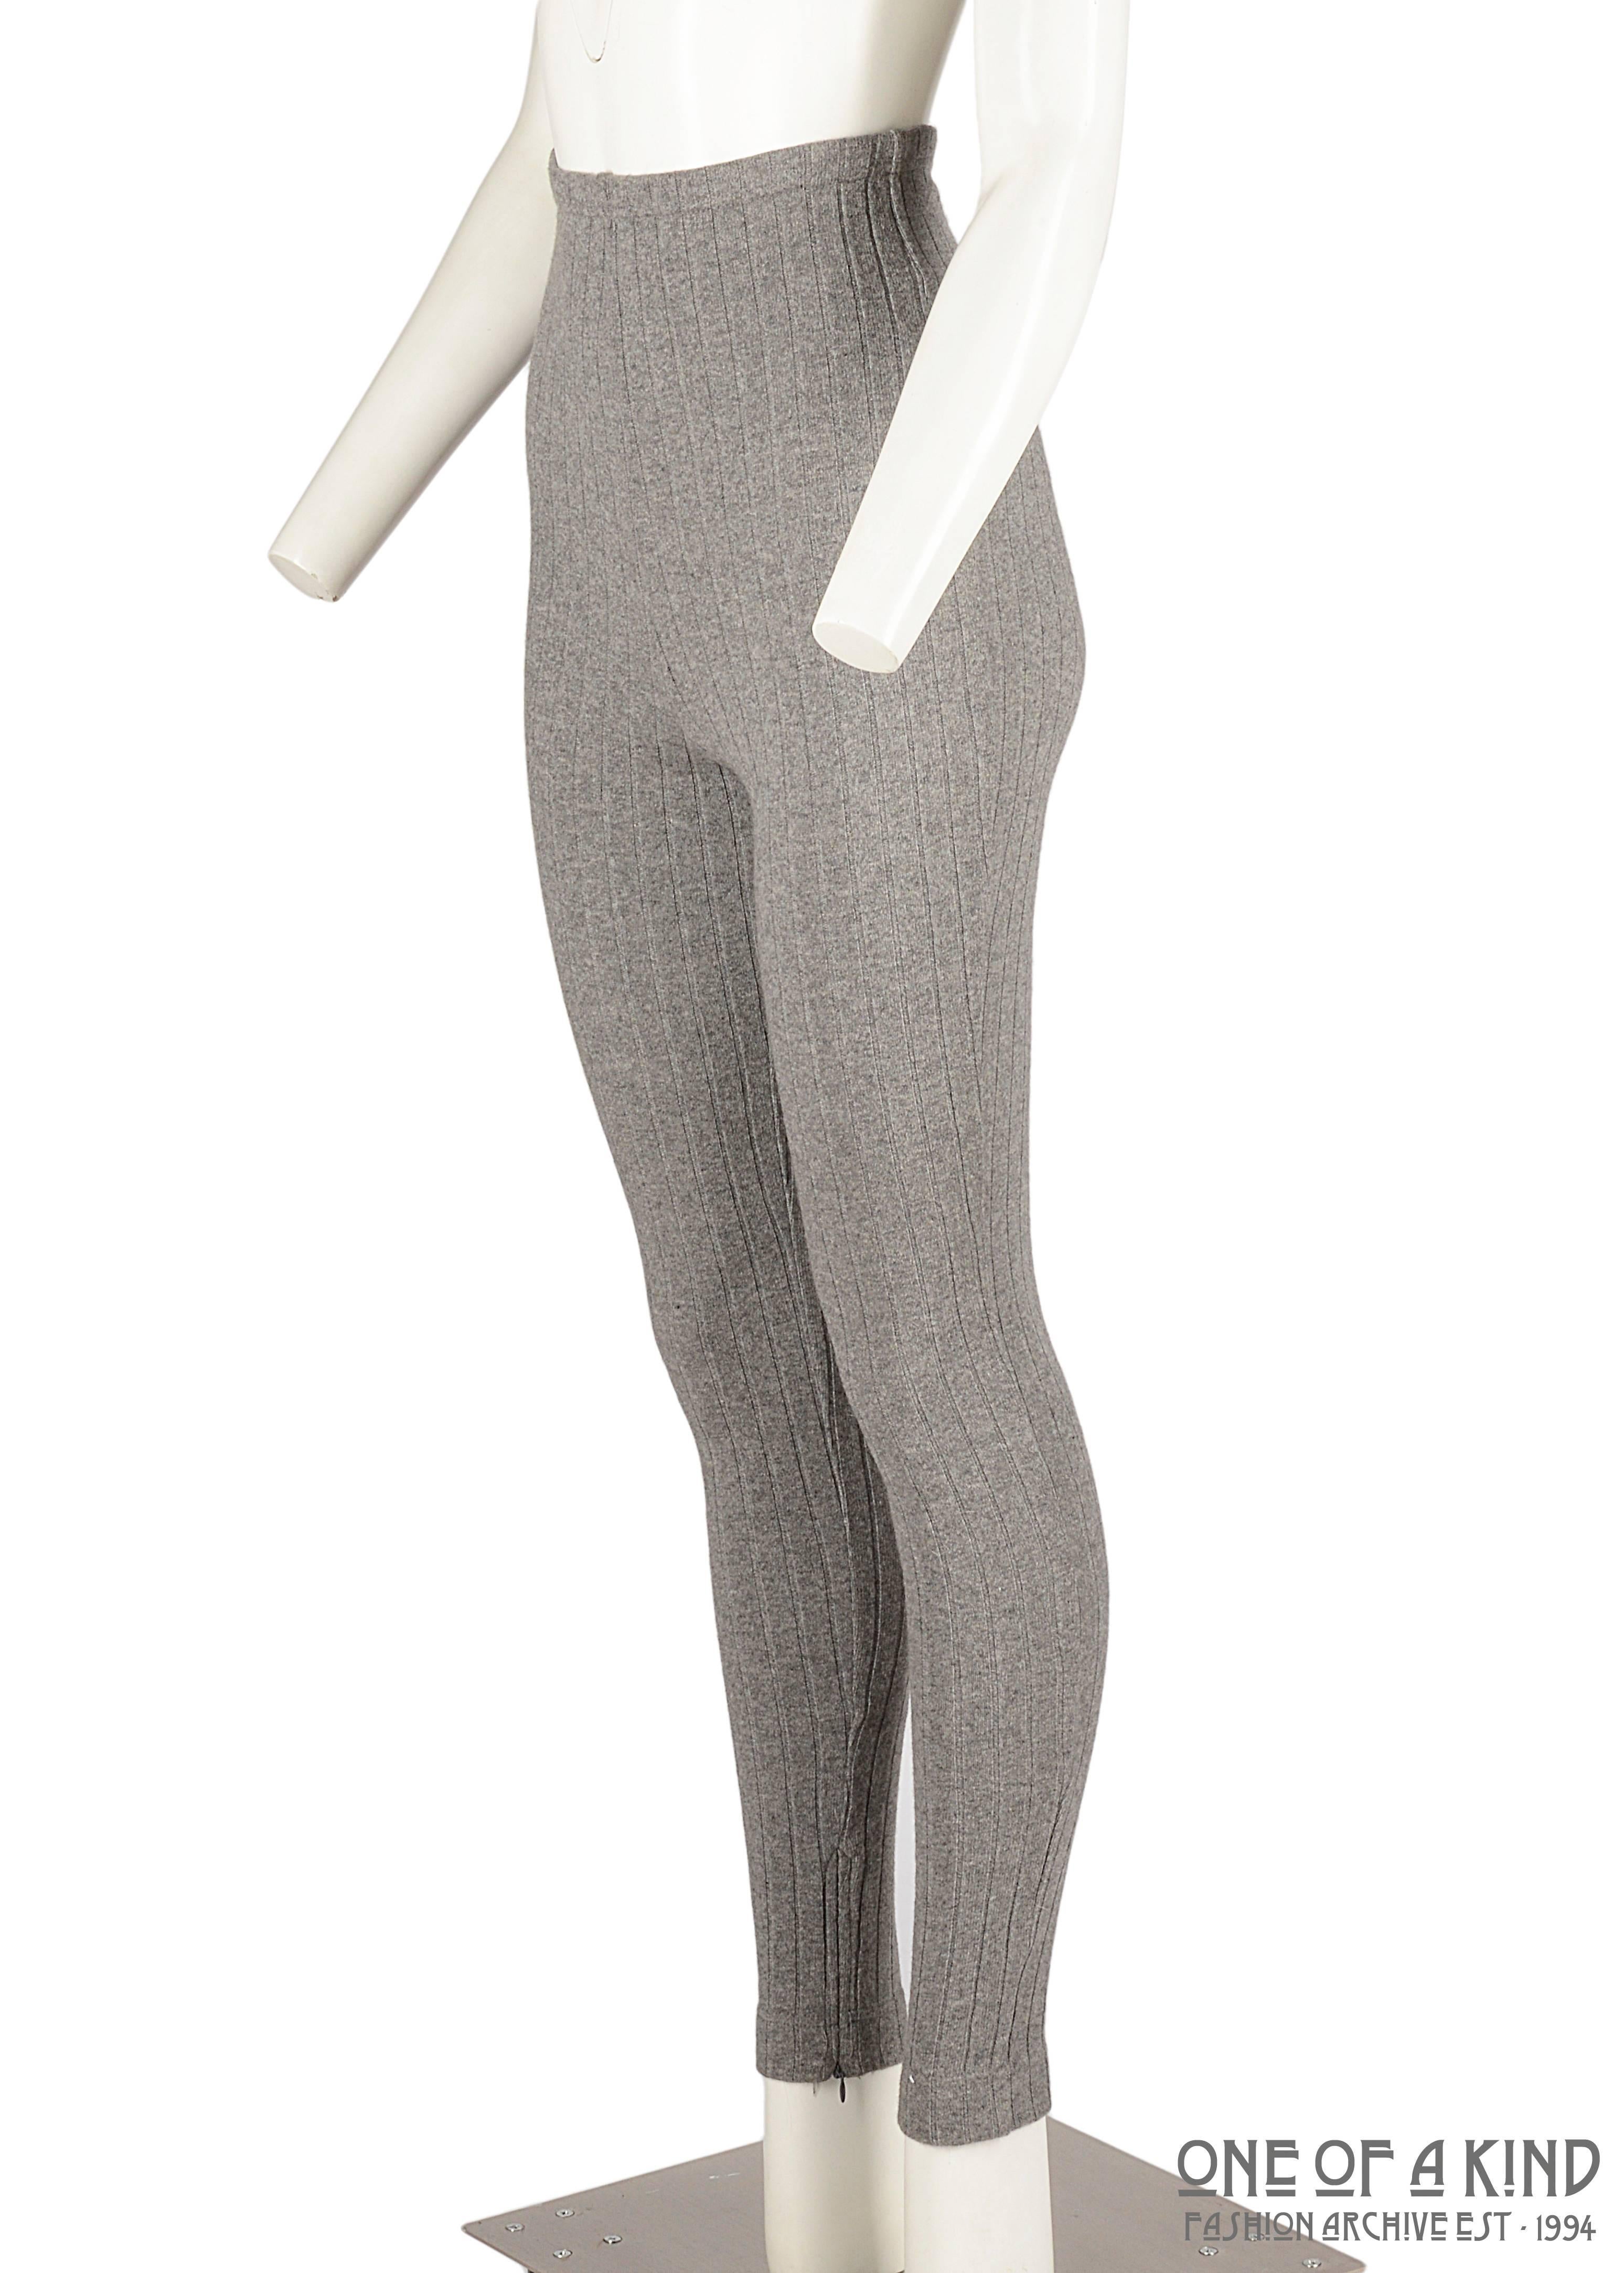 Dolce & Gabbana grey wool ribbed knit high waisted leggings. 

- Zip fastening on center back seam and ankles. 

ca. 1990-1999